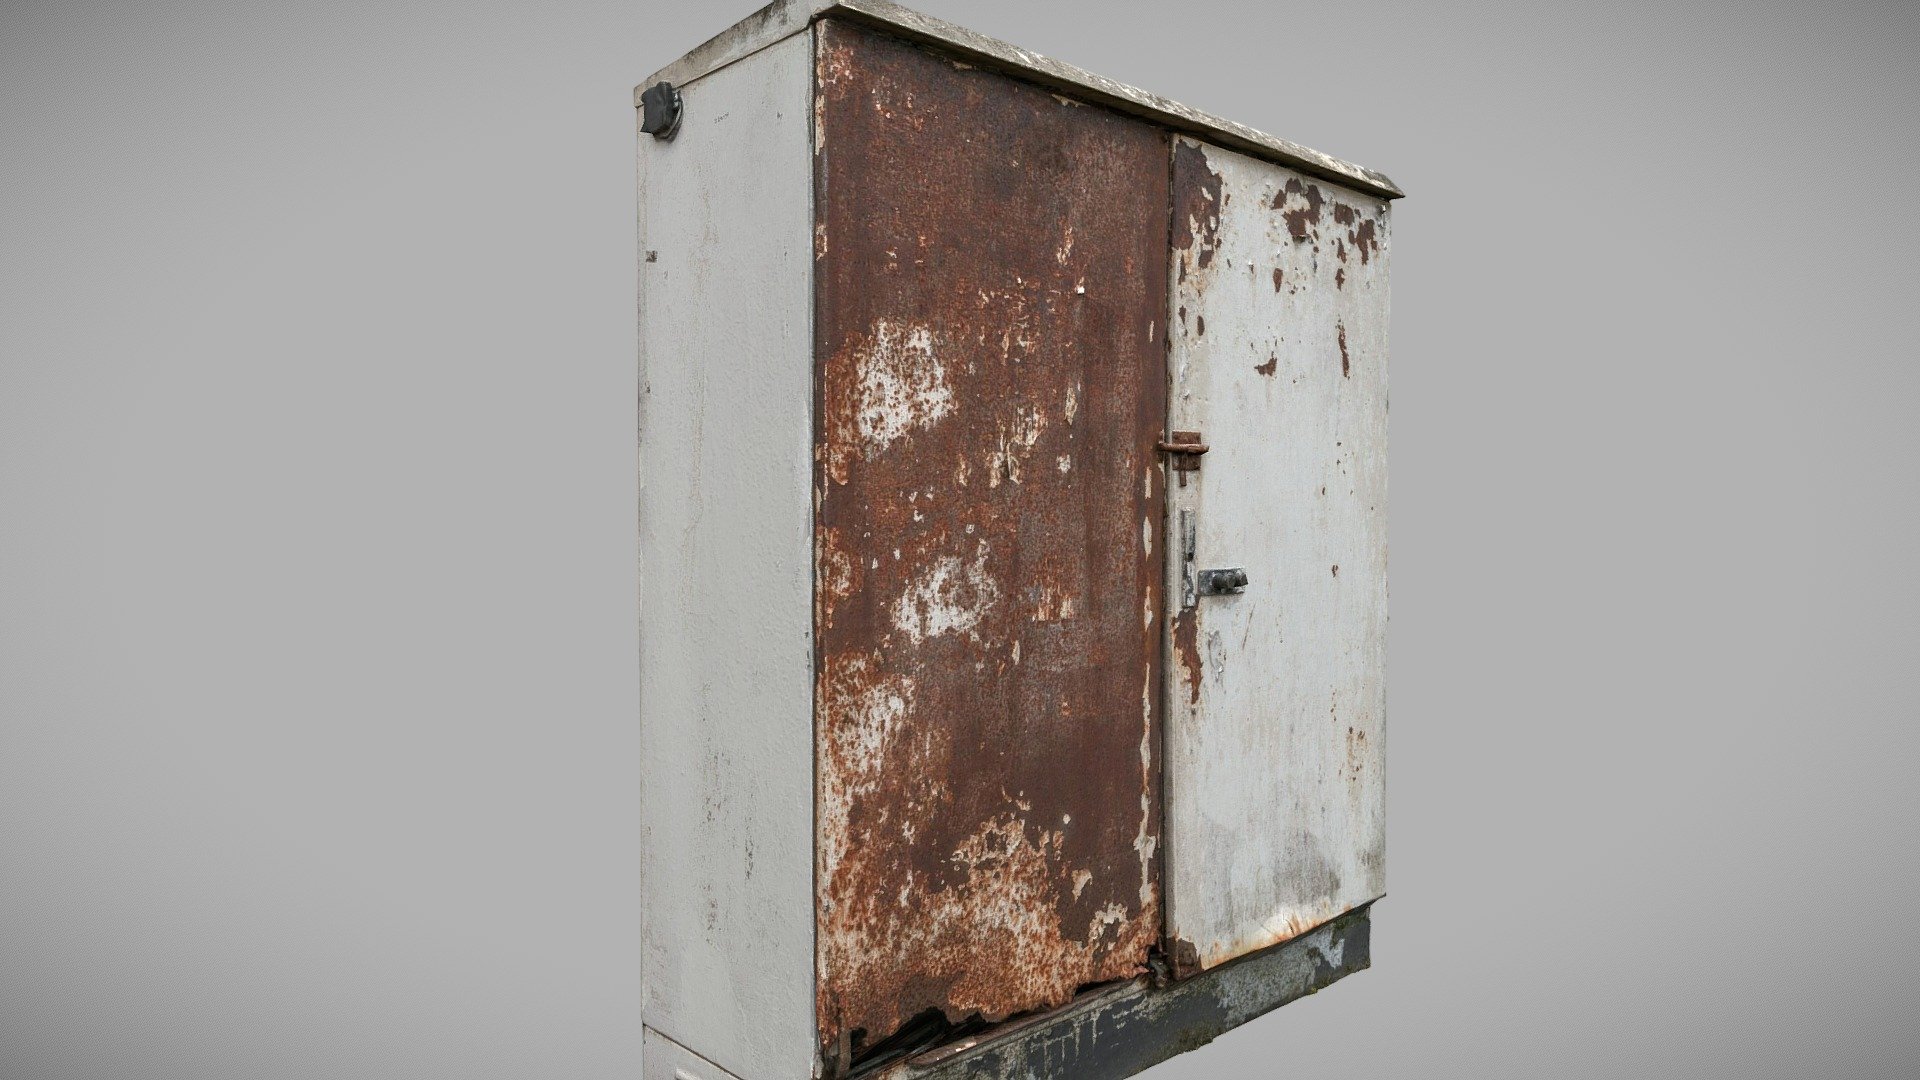 Electric box scan No. 16

Street props

Urban &amp; Industrial collections

Good for adding realism to your urban / abandoned scenes

diffuse/normal/specular - Electric box scan No. 16 - Buy Royalty Free 3D model by 3Dystopia (@Dystopia) 3d model